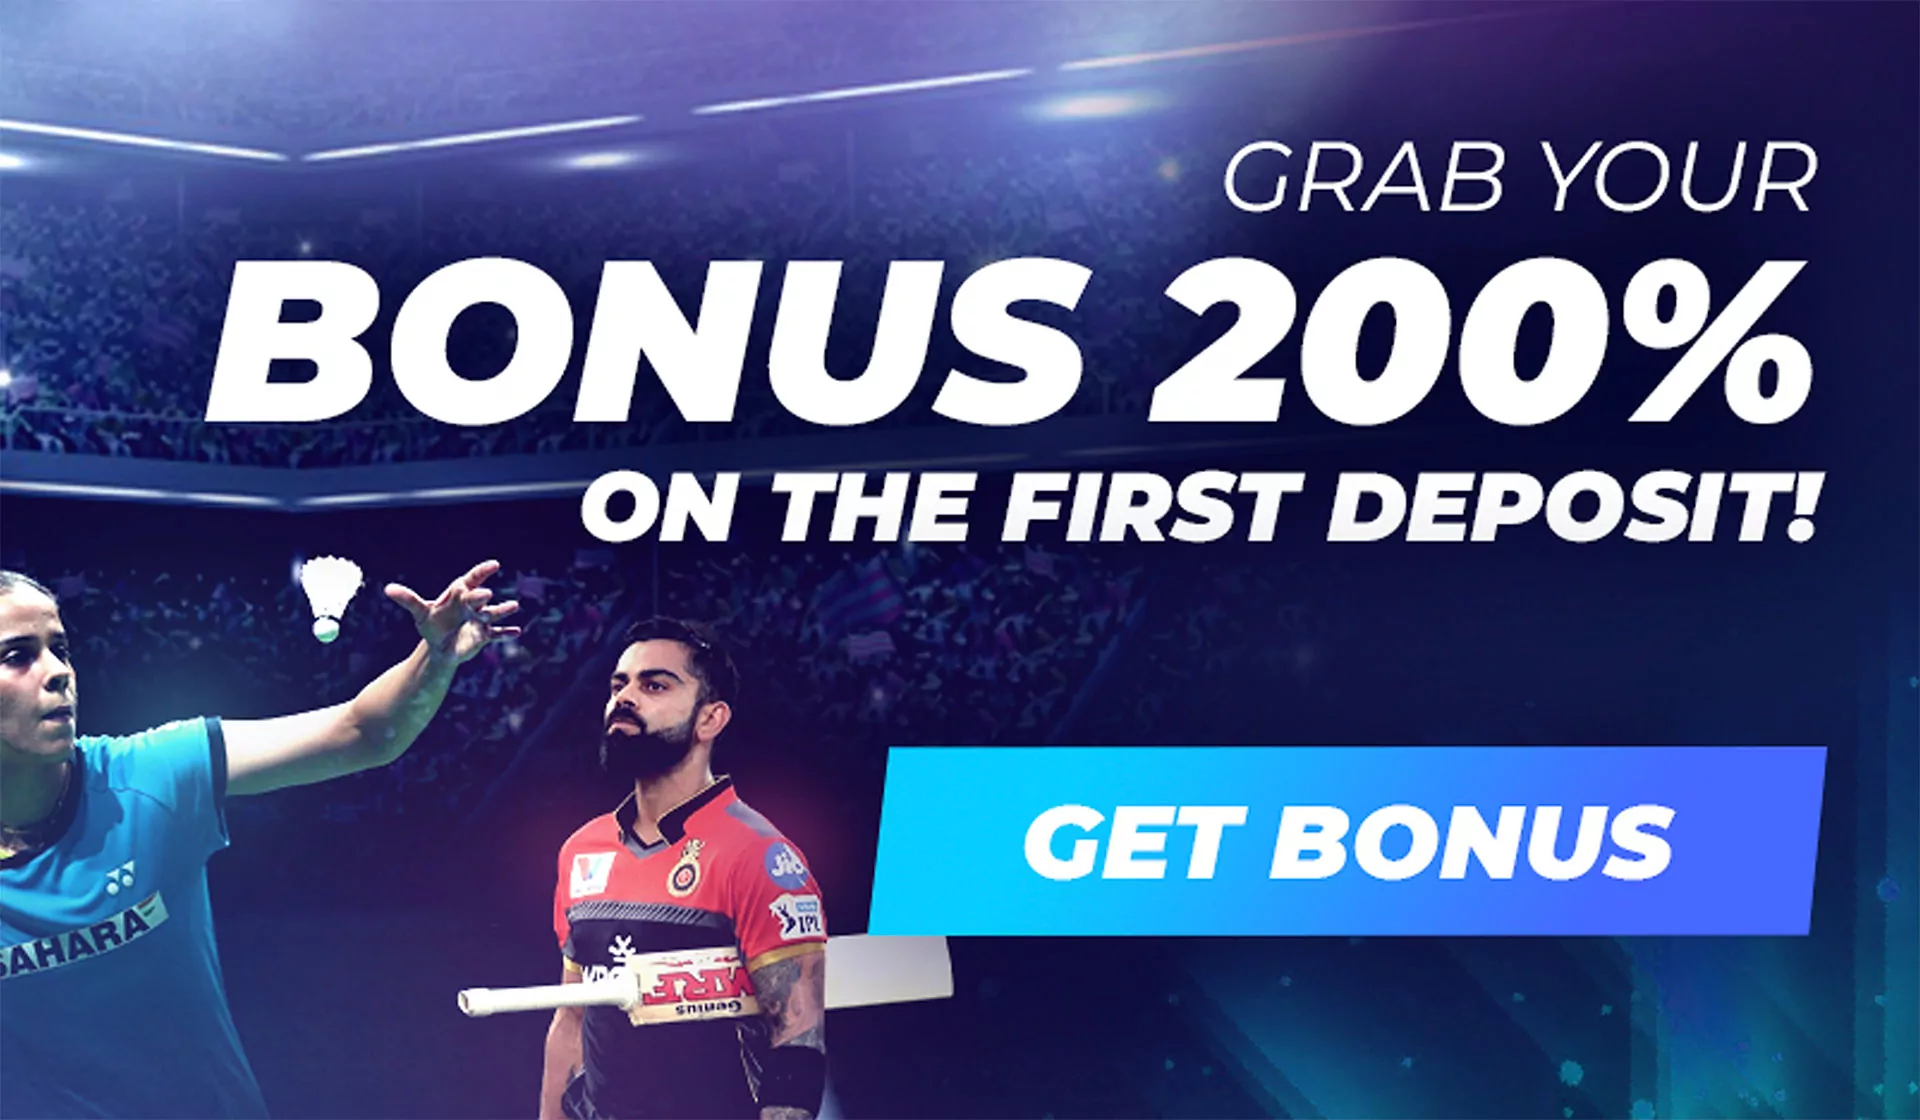 Get your welcome bonus and place even more profitable bets.